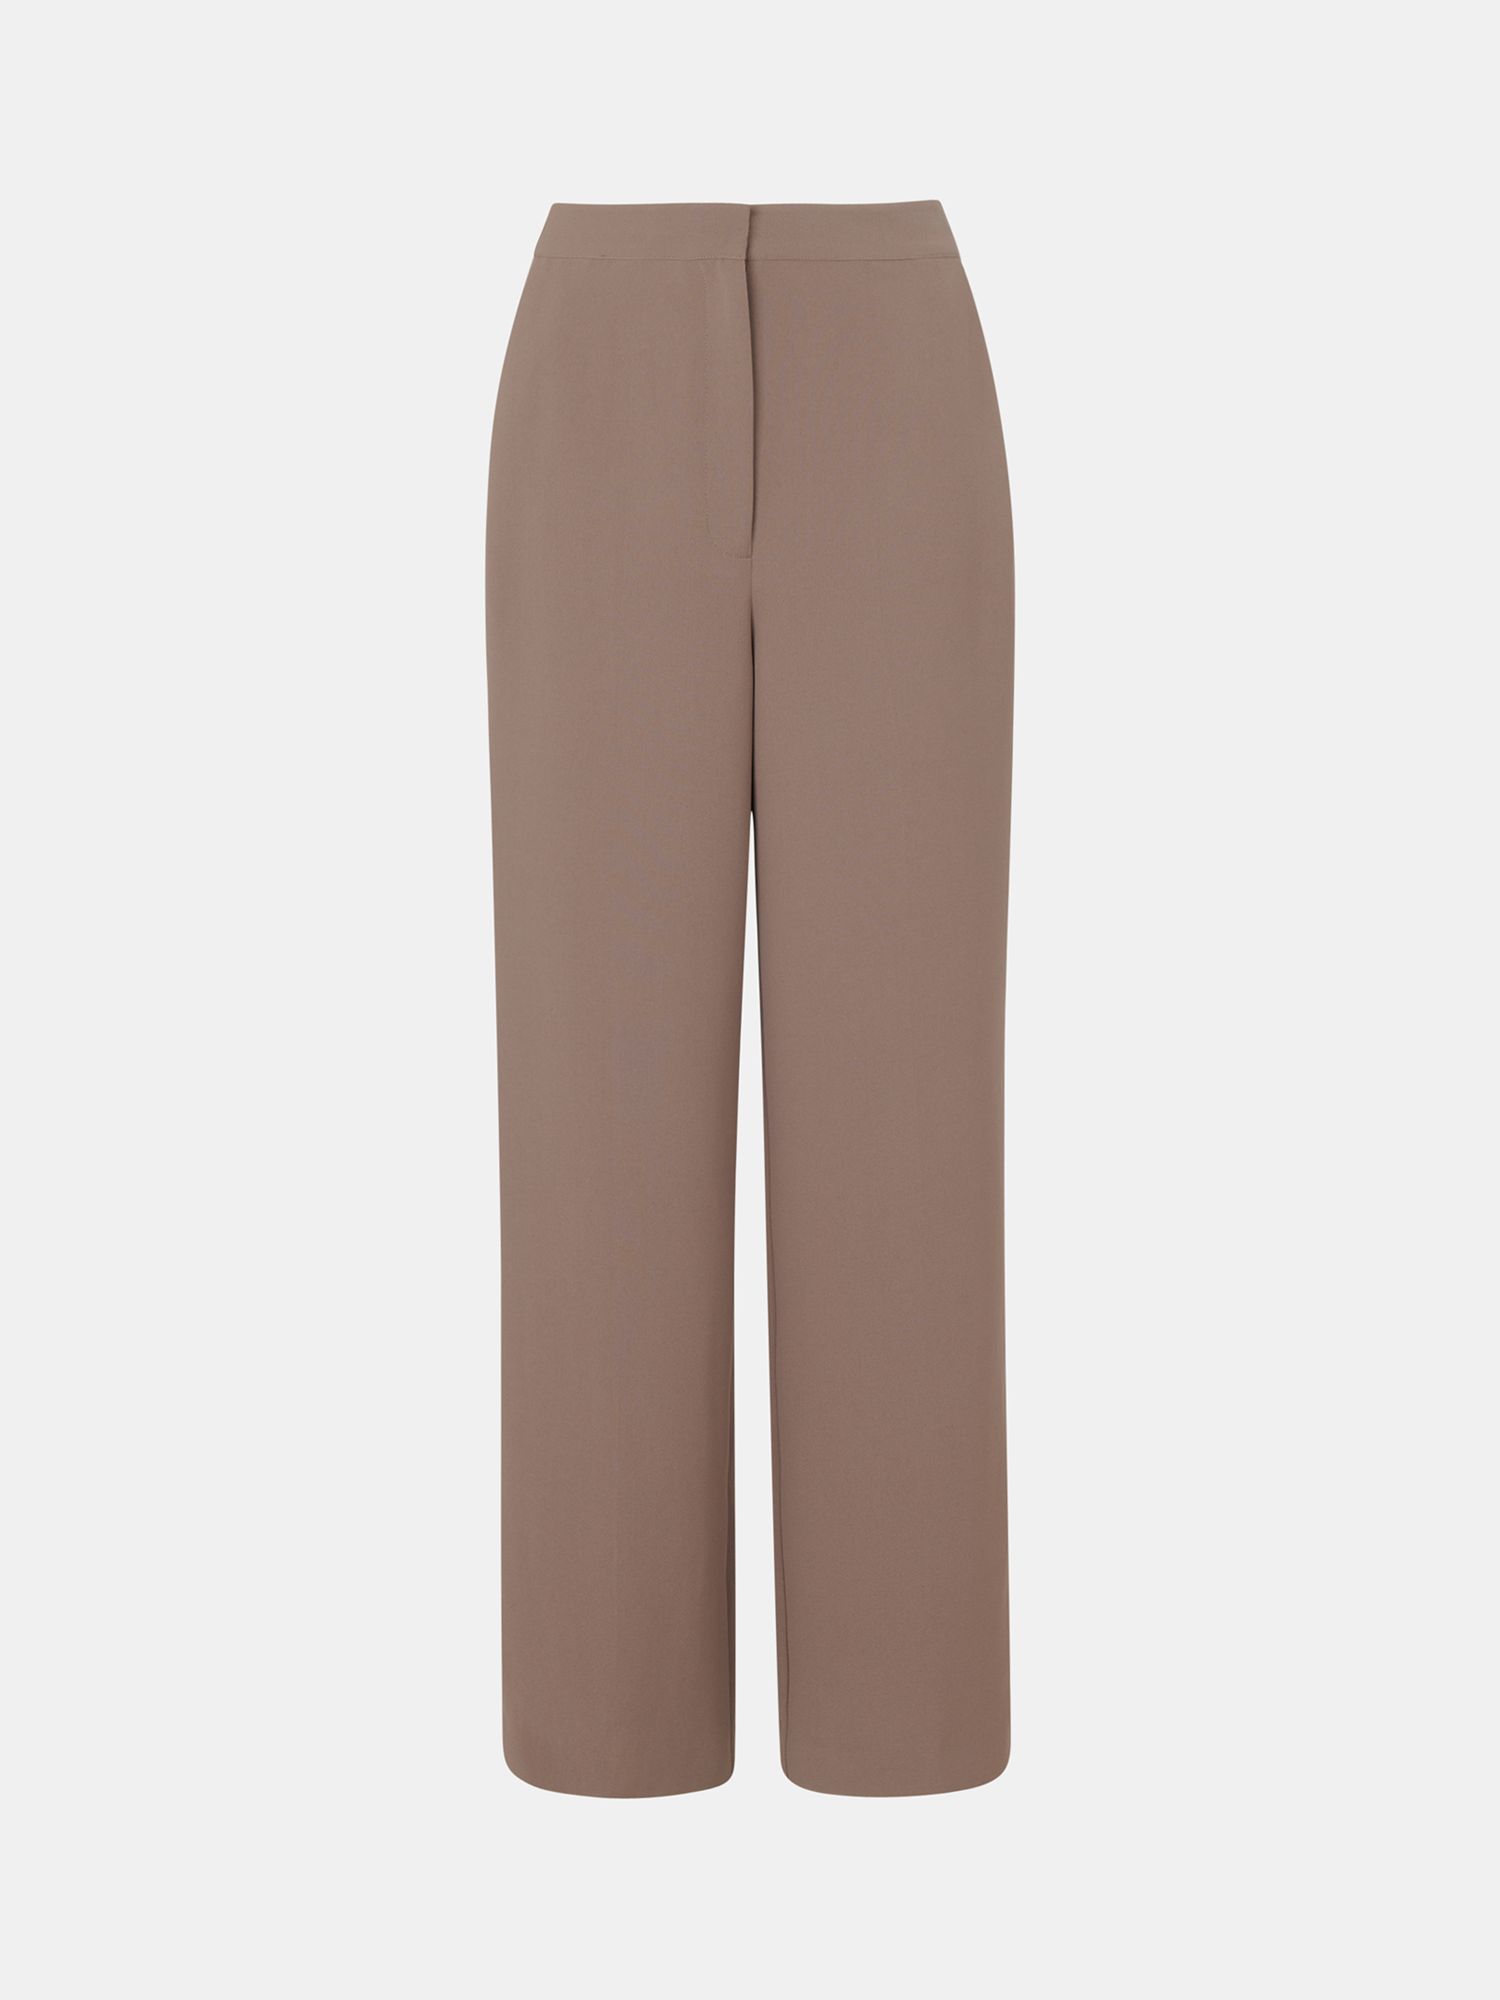 Whistles Ultimate Full Length Wide Leg Trousers, Taupe, 10